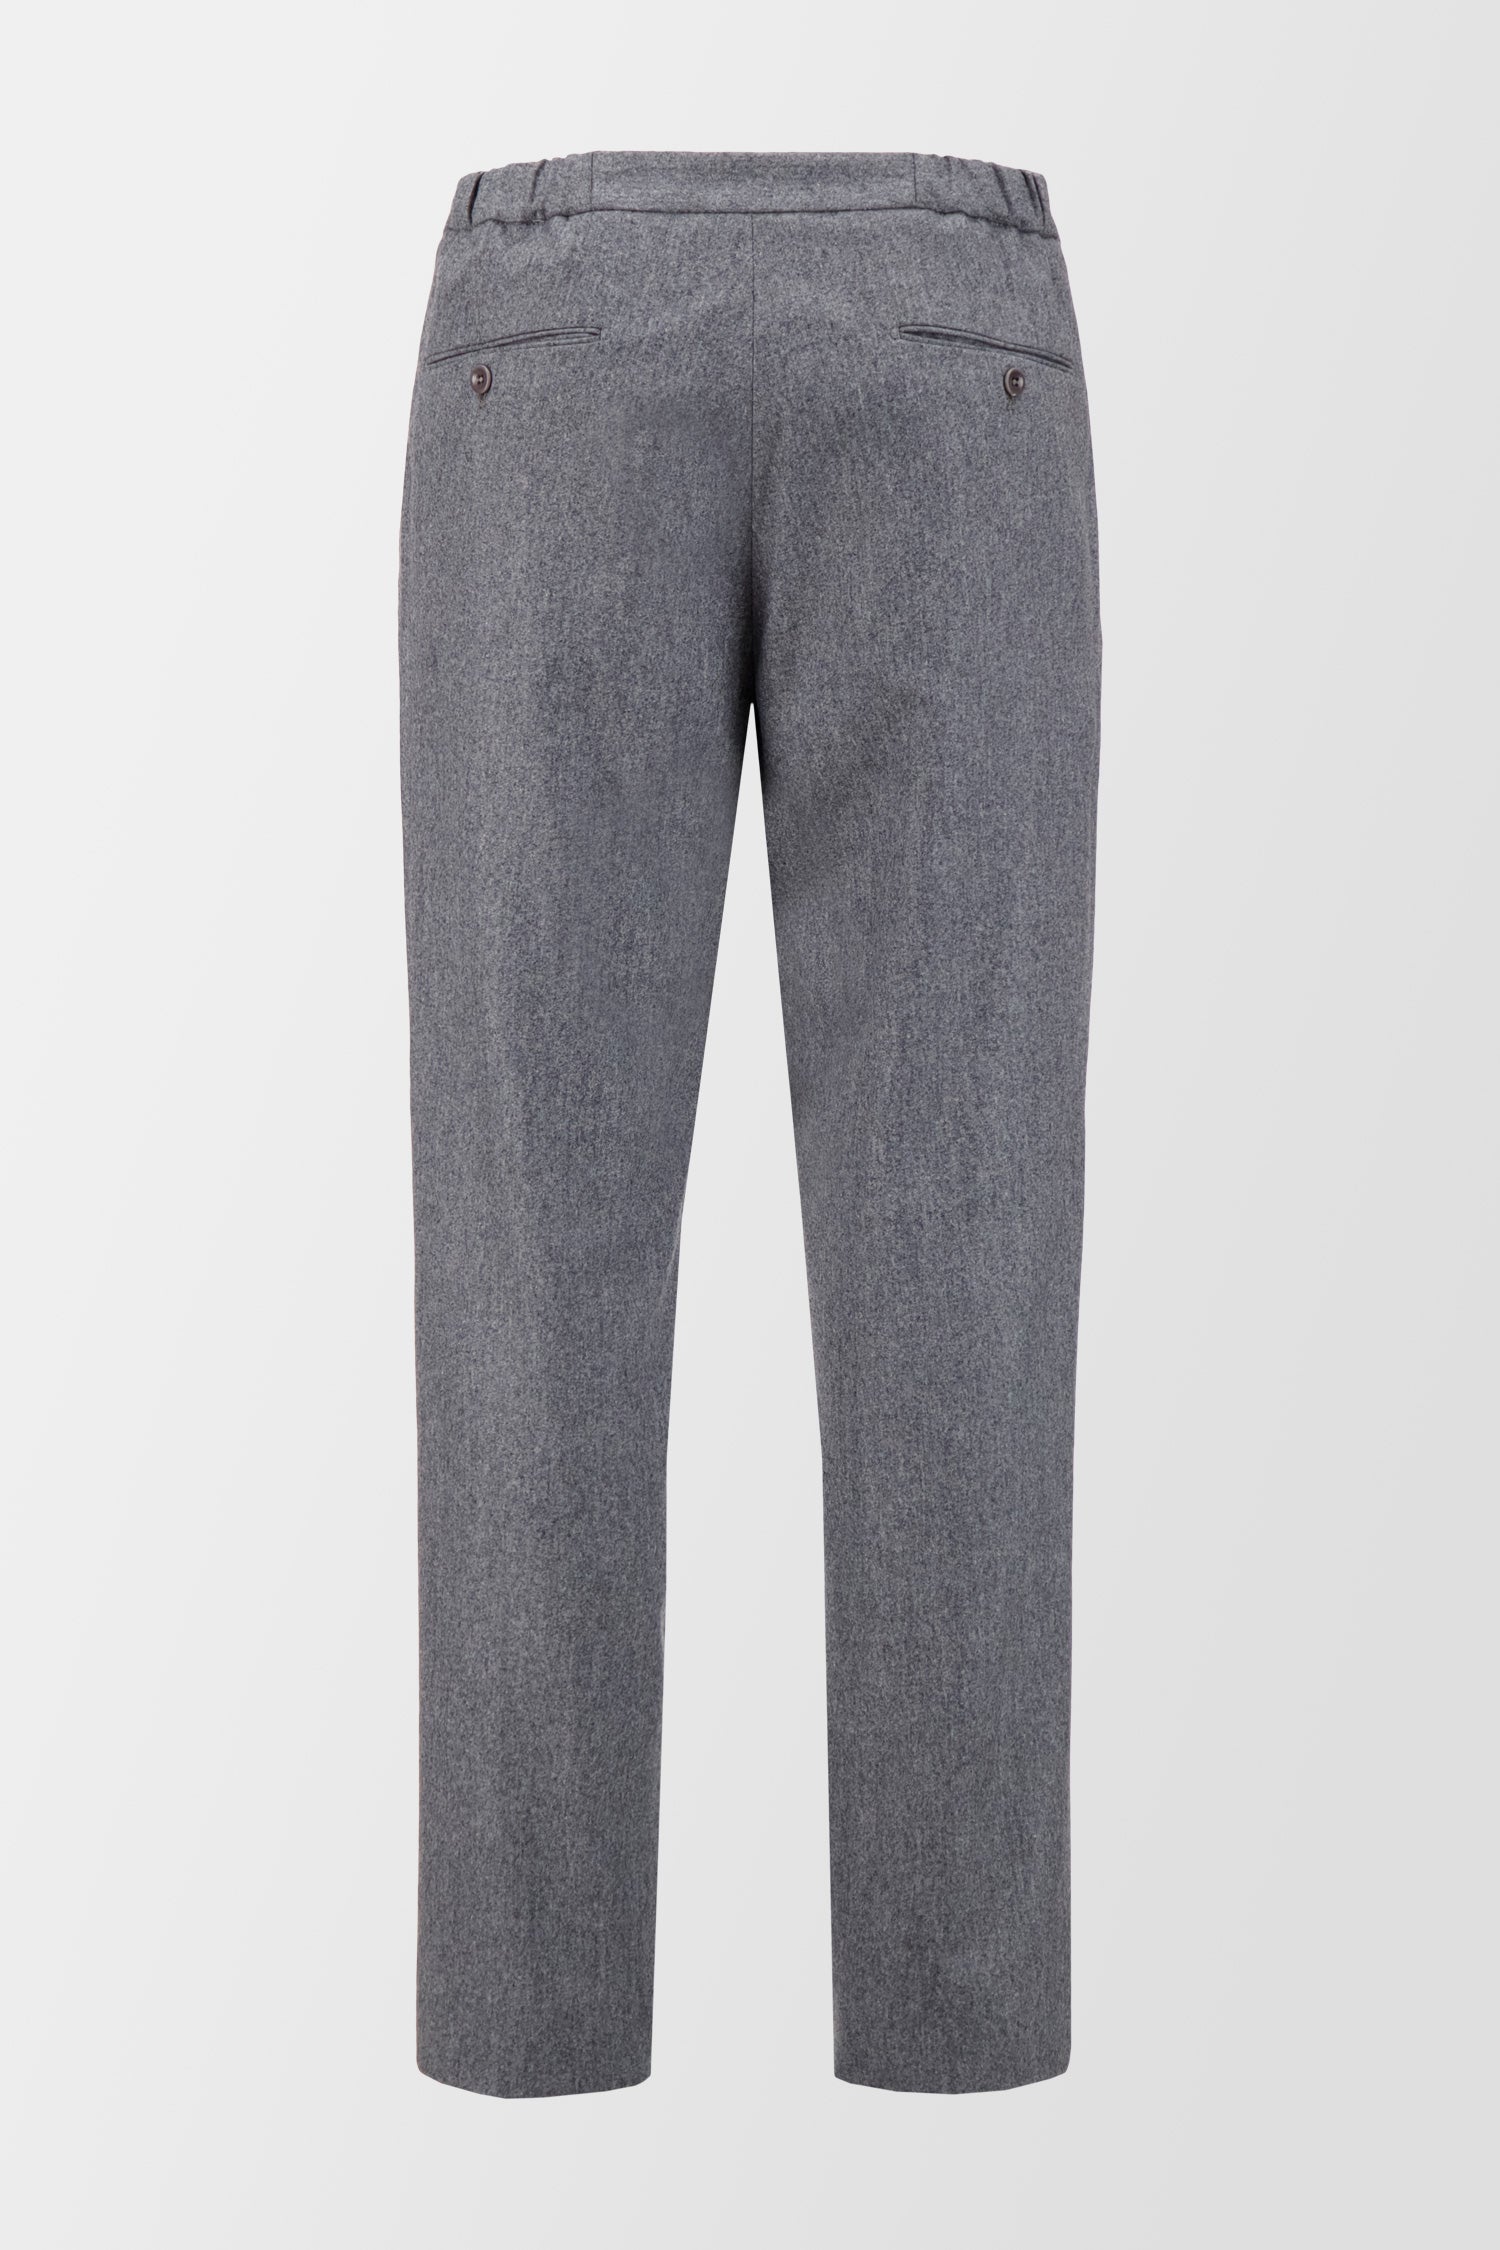 Incotex Grey Woven Trousers